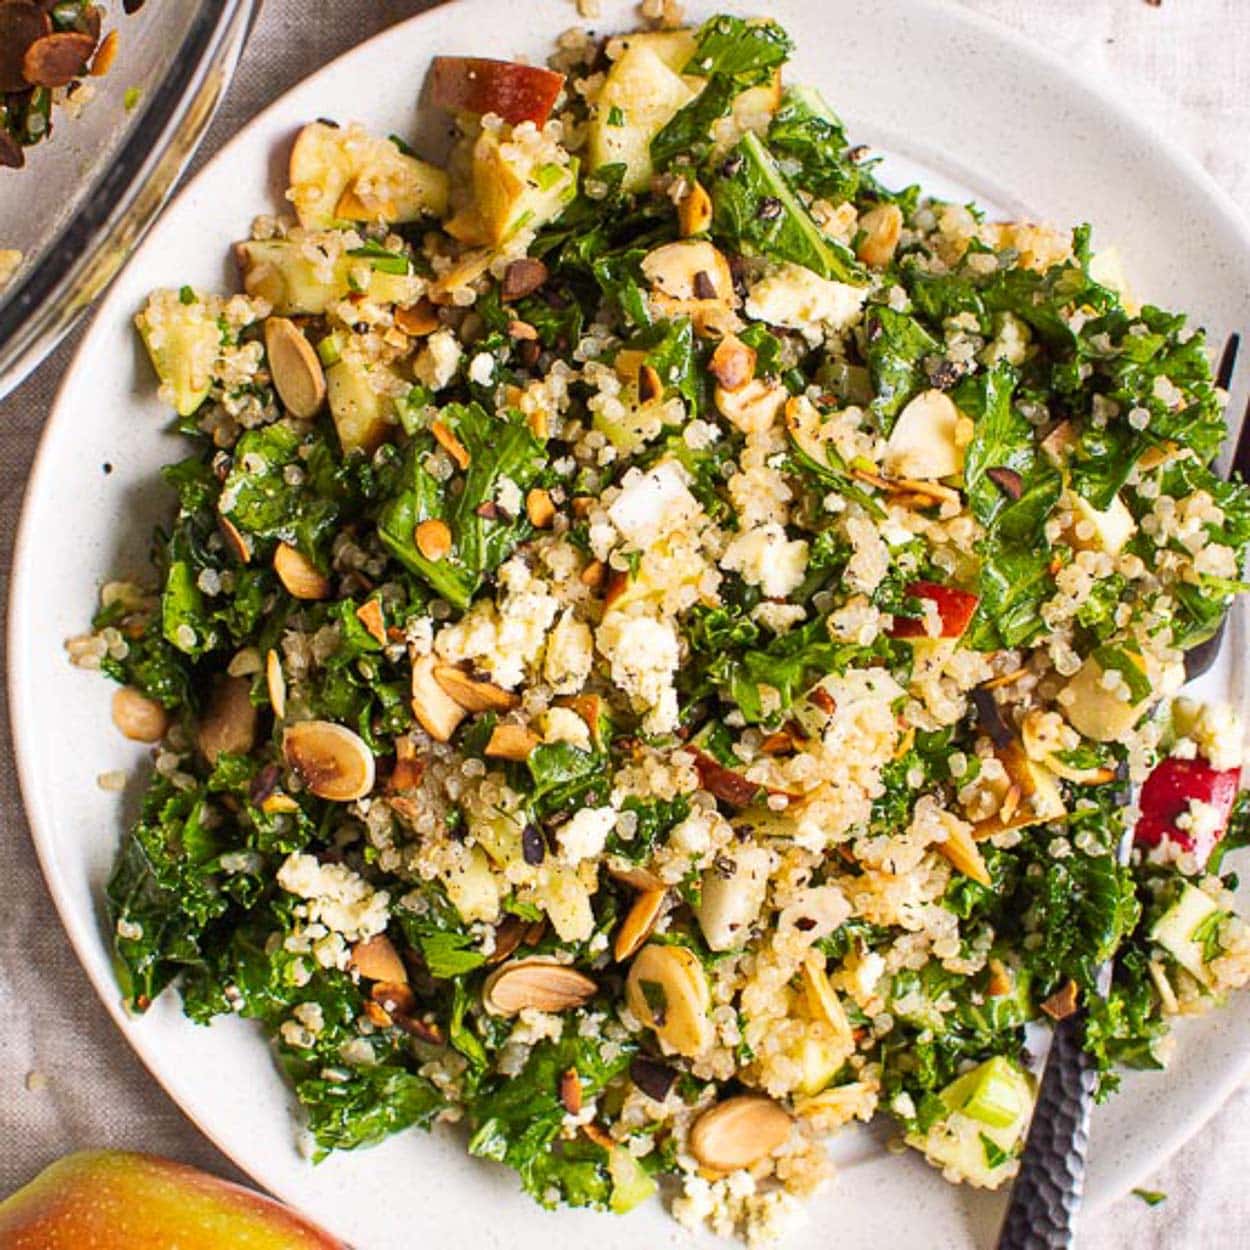 Kale and Quinoa Salad with Apples and Cinnamon Dressing - iFoodReal.com